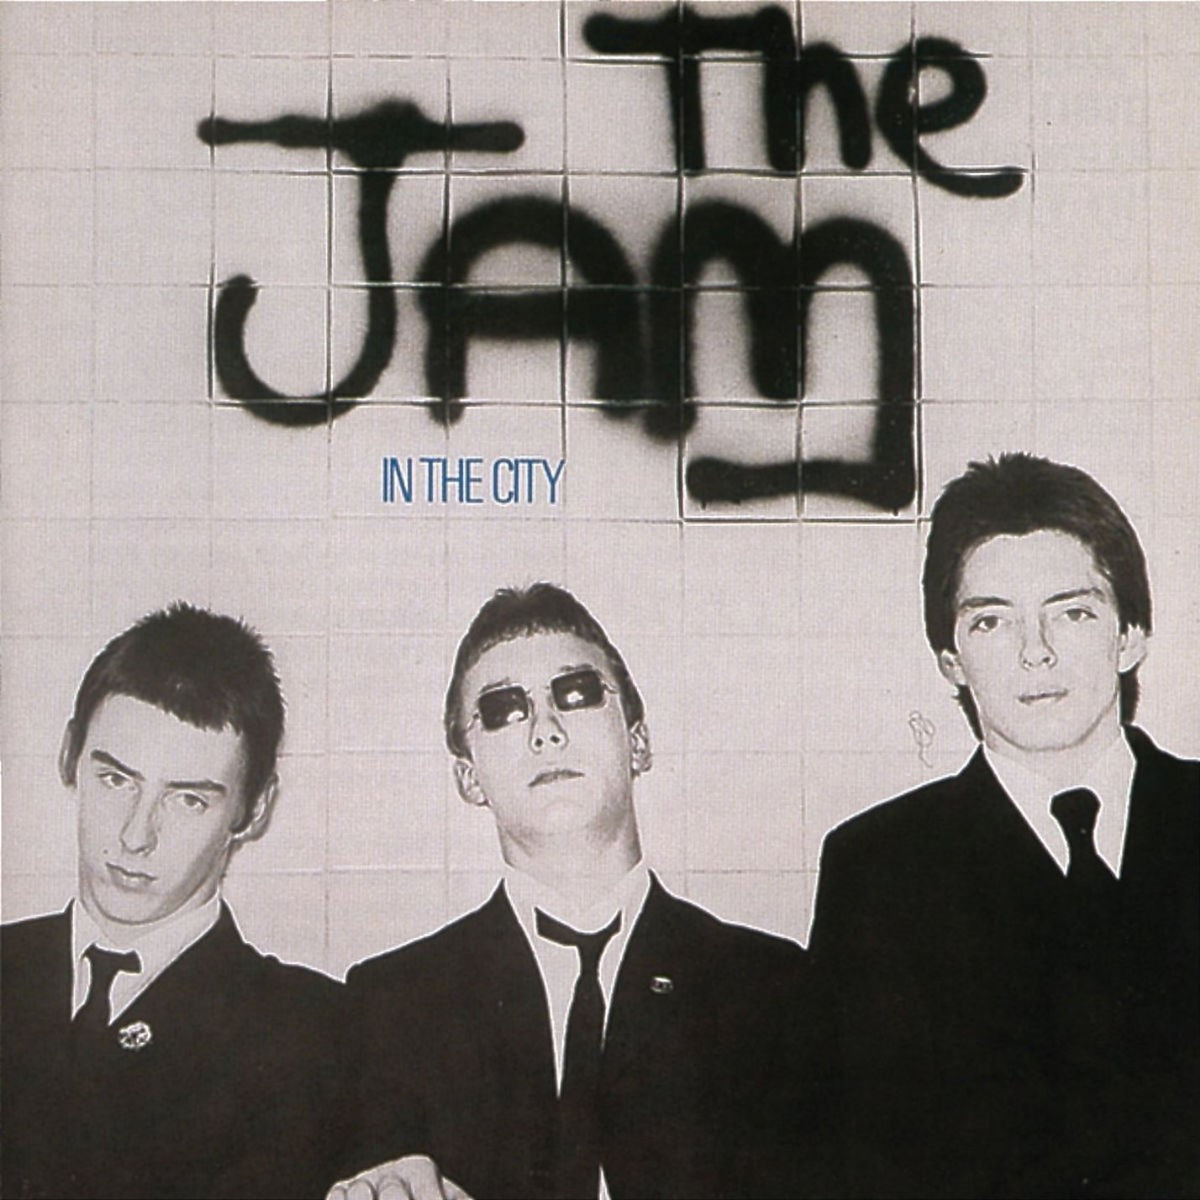 THE JAM - IN THE CITY - VINYL LP - Wah Wah Records